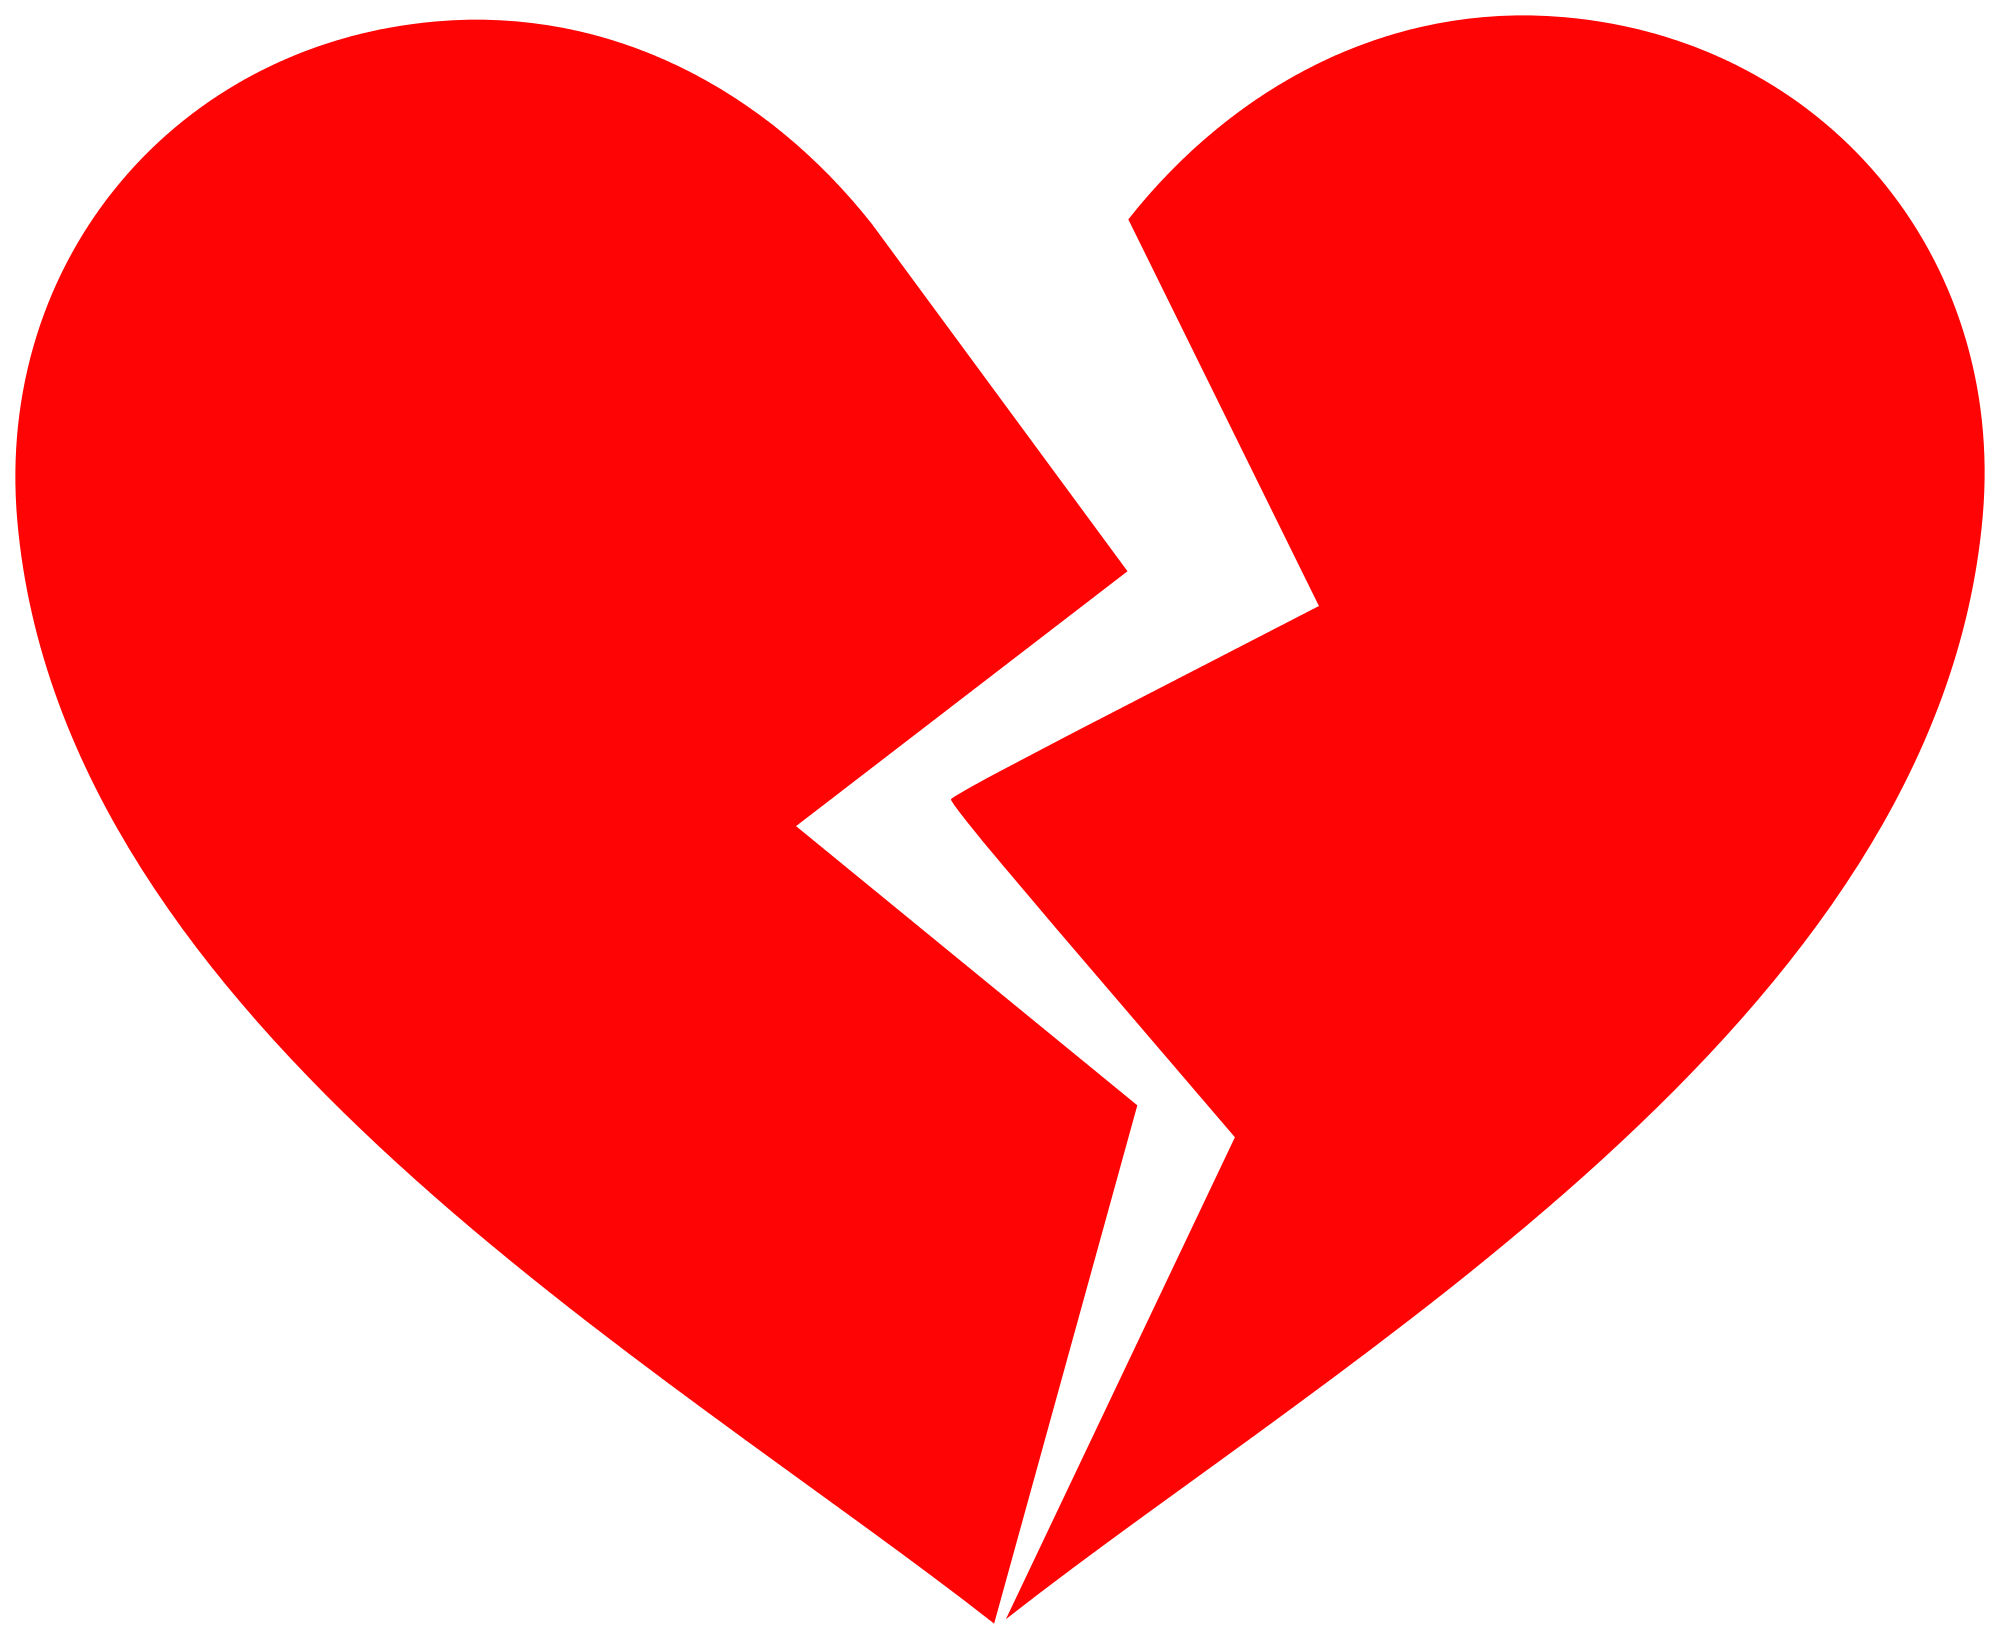 Free Download Broken Heart Images Png Transparent Background Free Download 45697 Freeiconspng